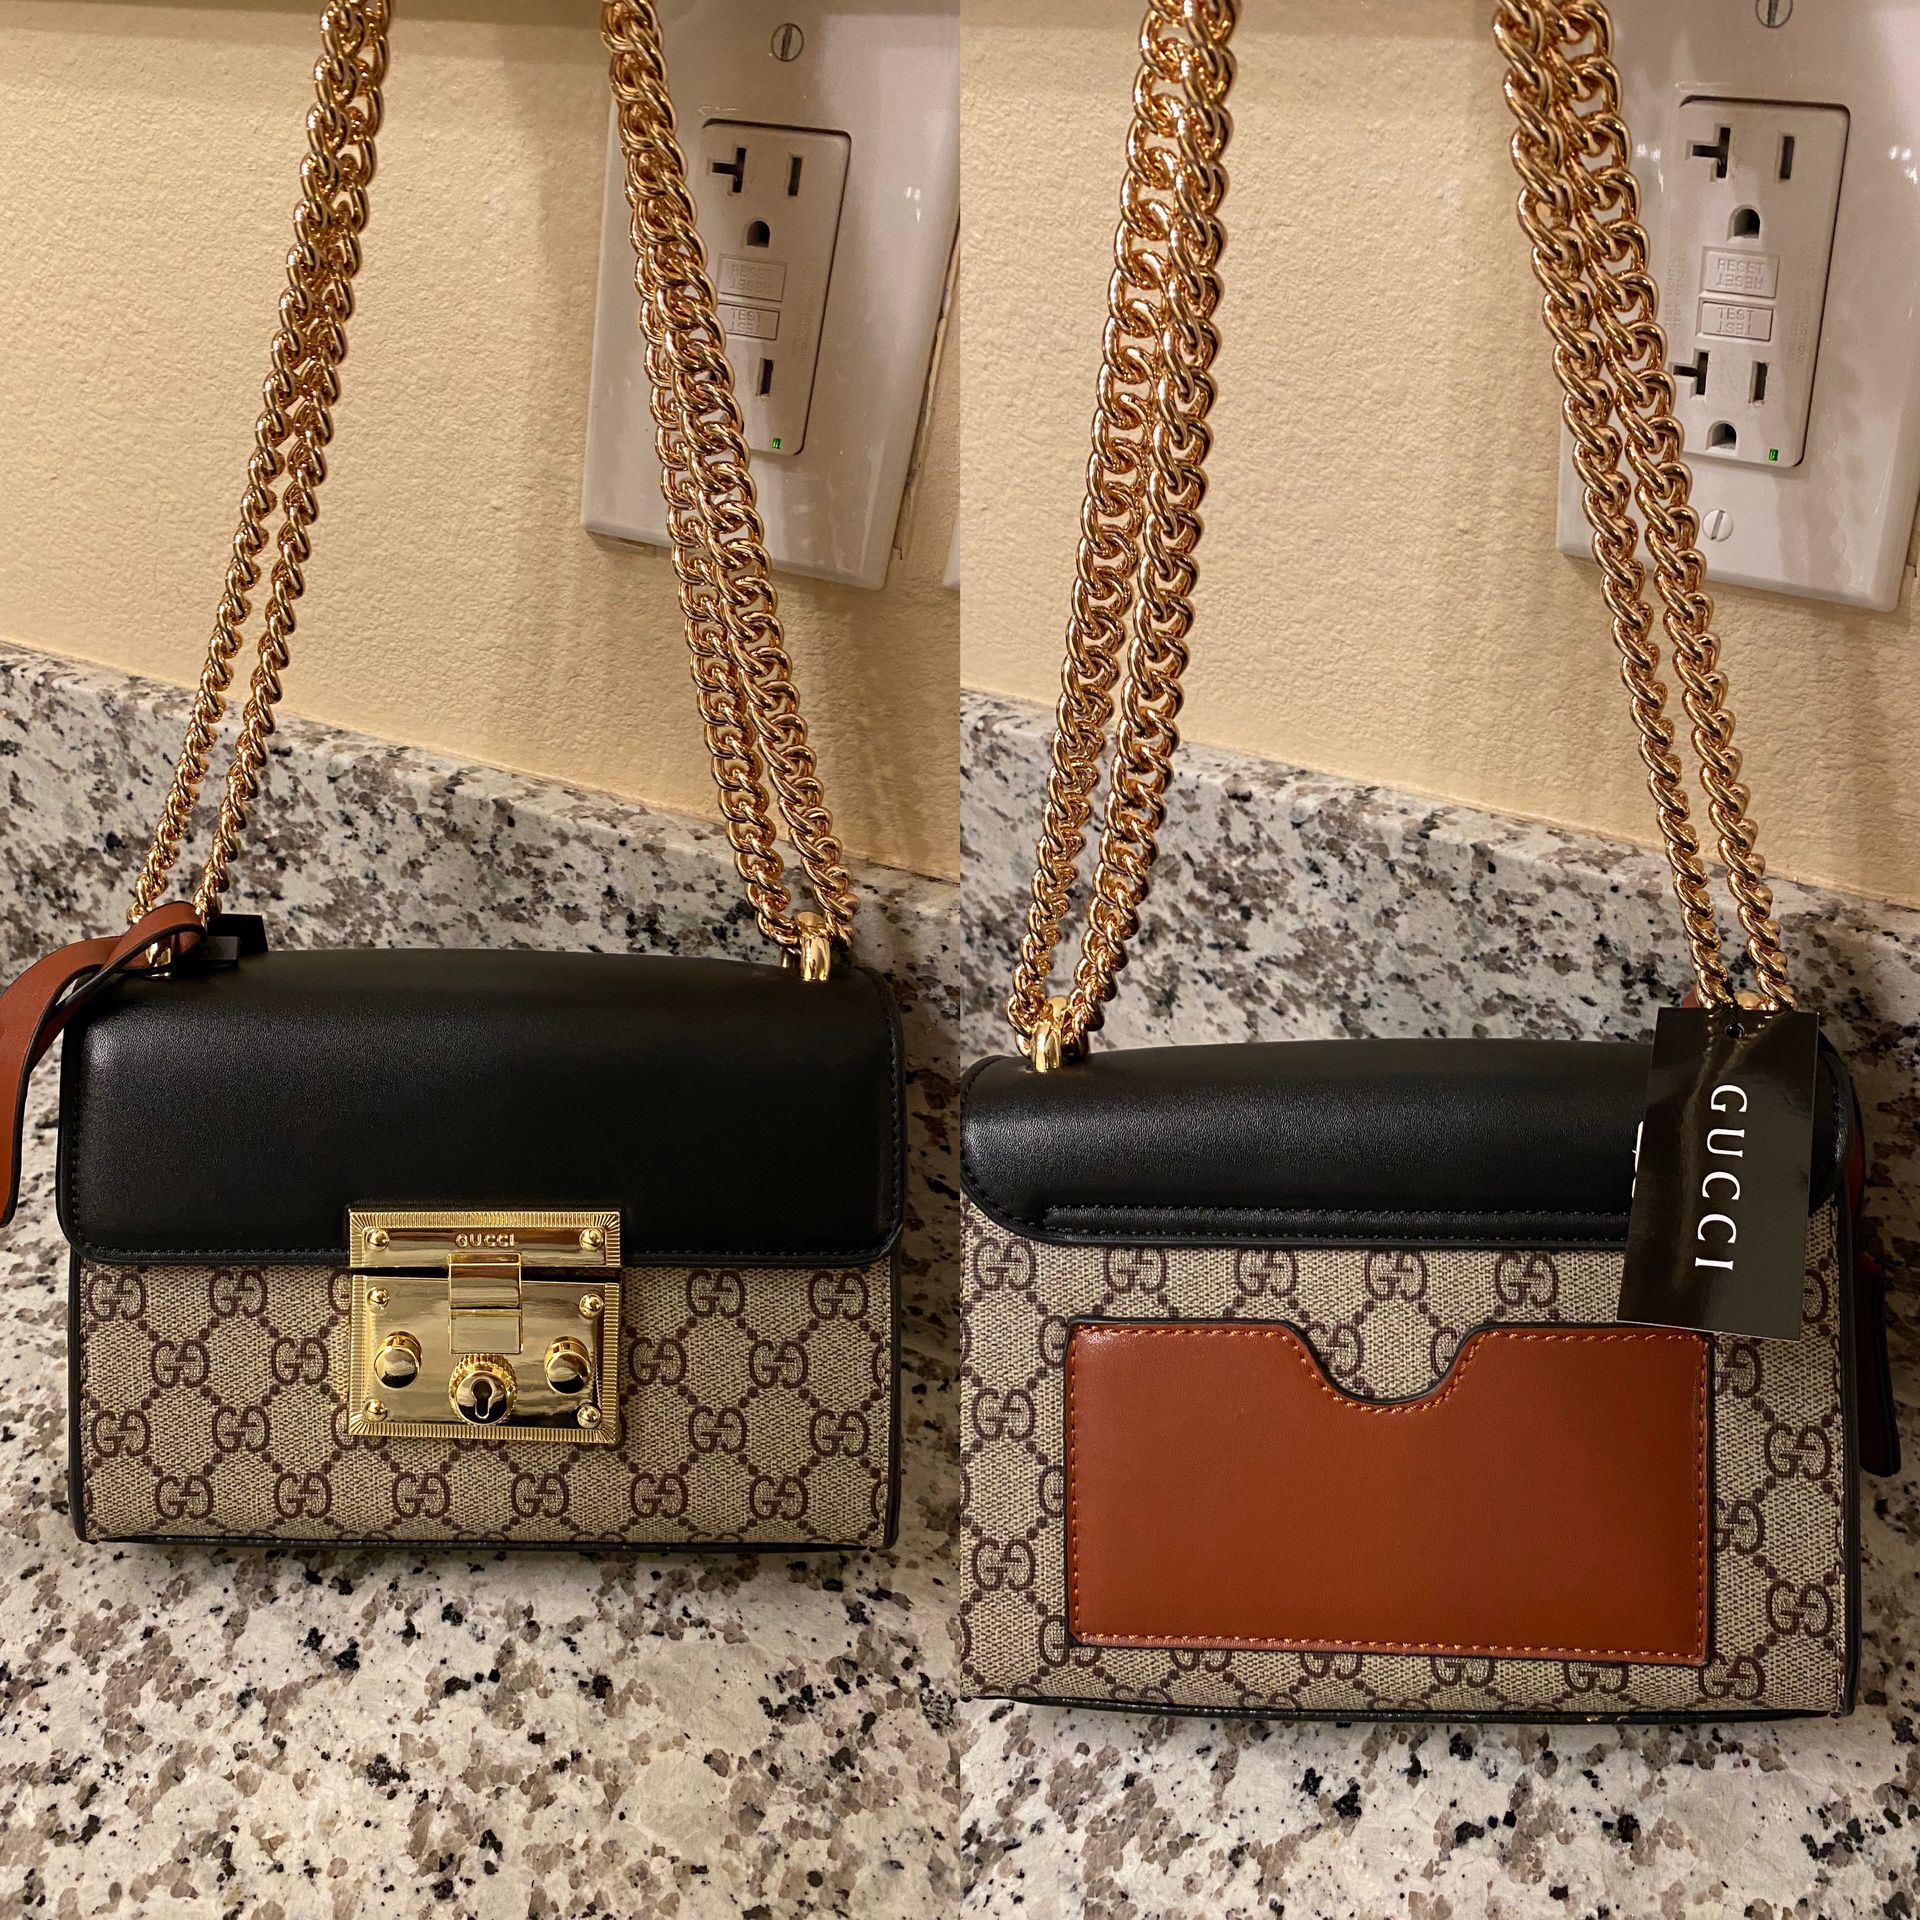 Top Grade Gucci Bags For Sale for Sale in Corona, CA - OfferUp